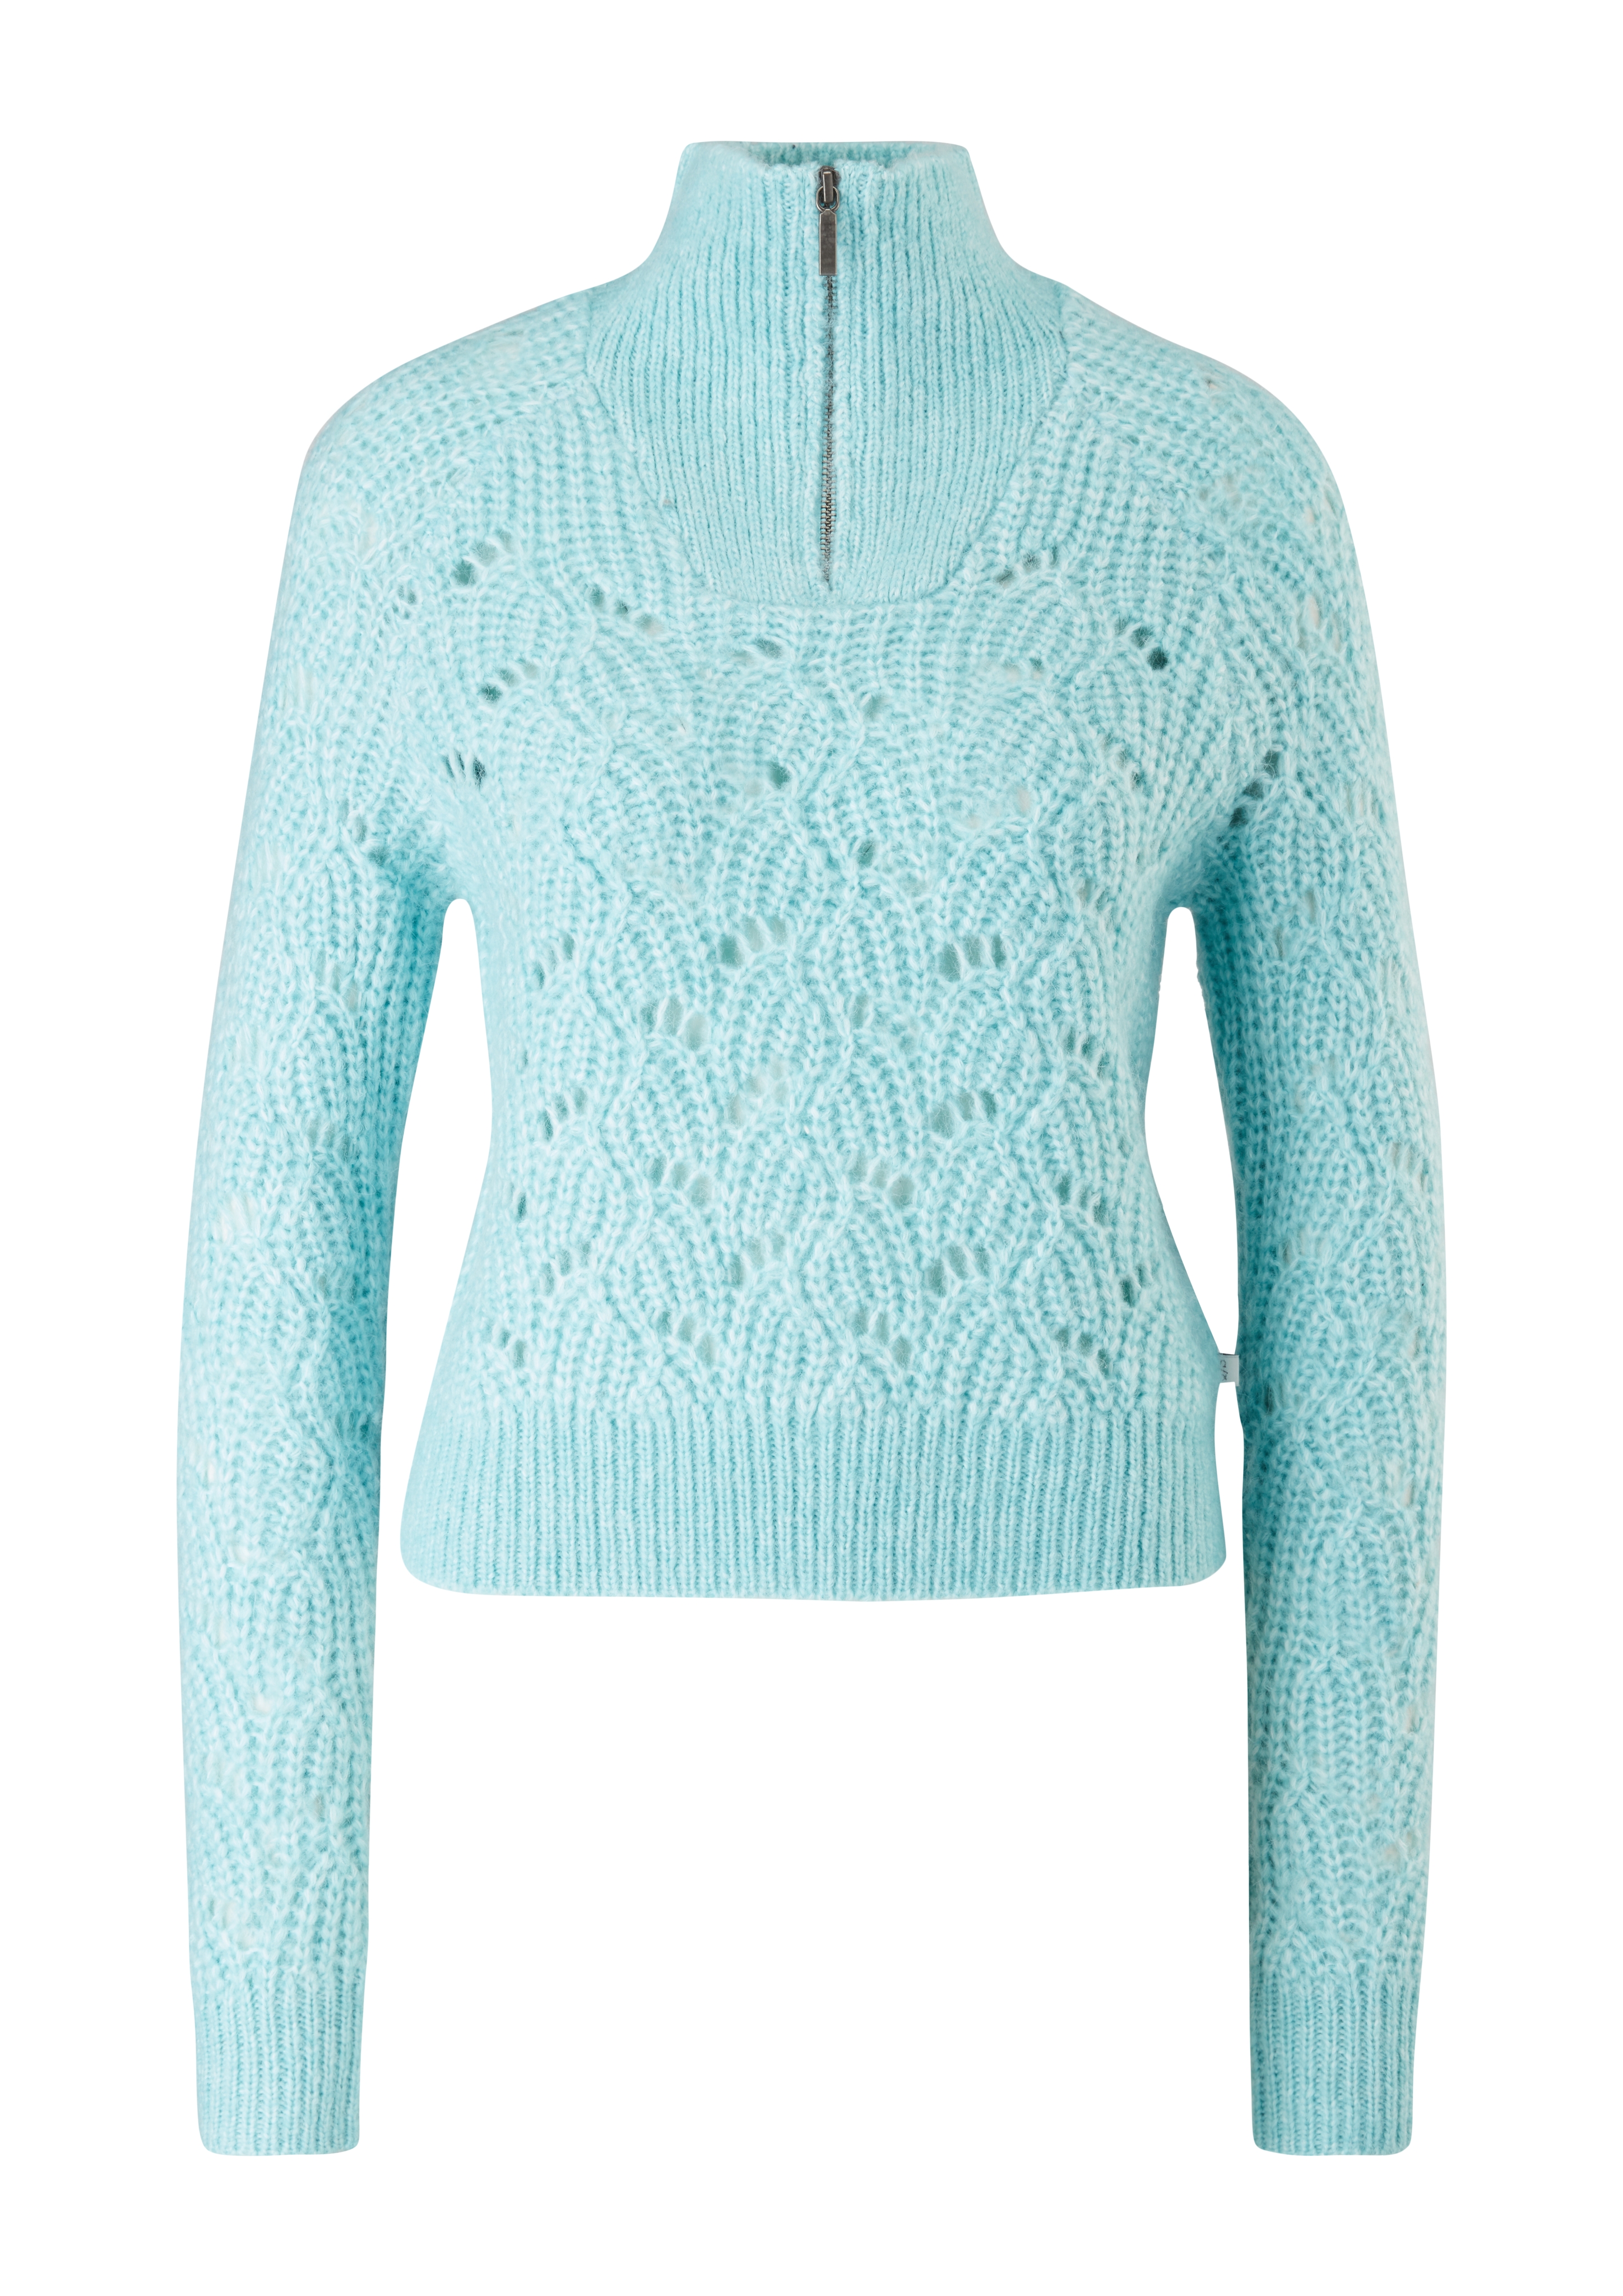 Q/S by s.Oliver Pullover in Hellblau 